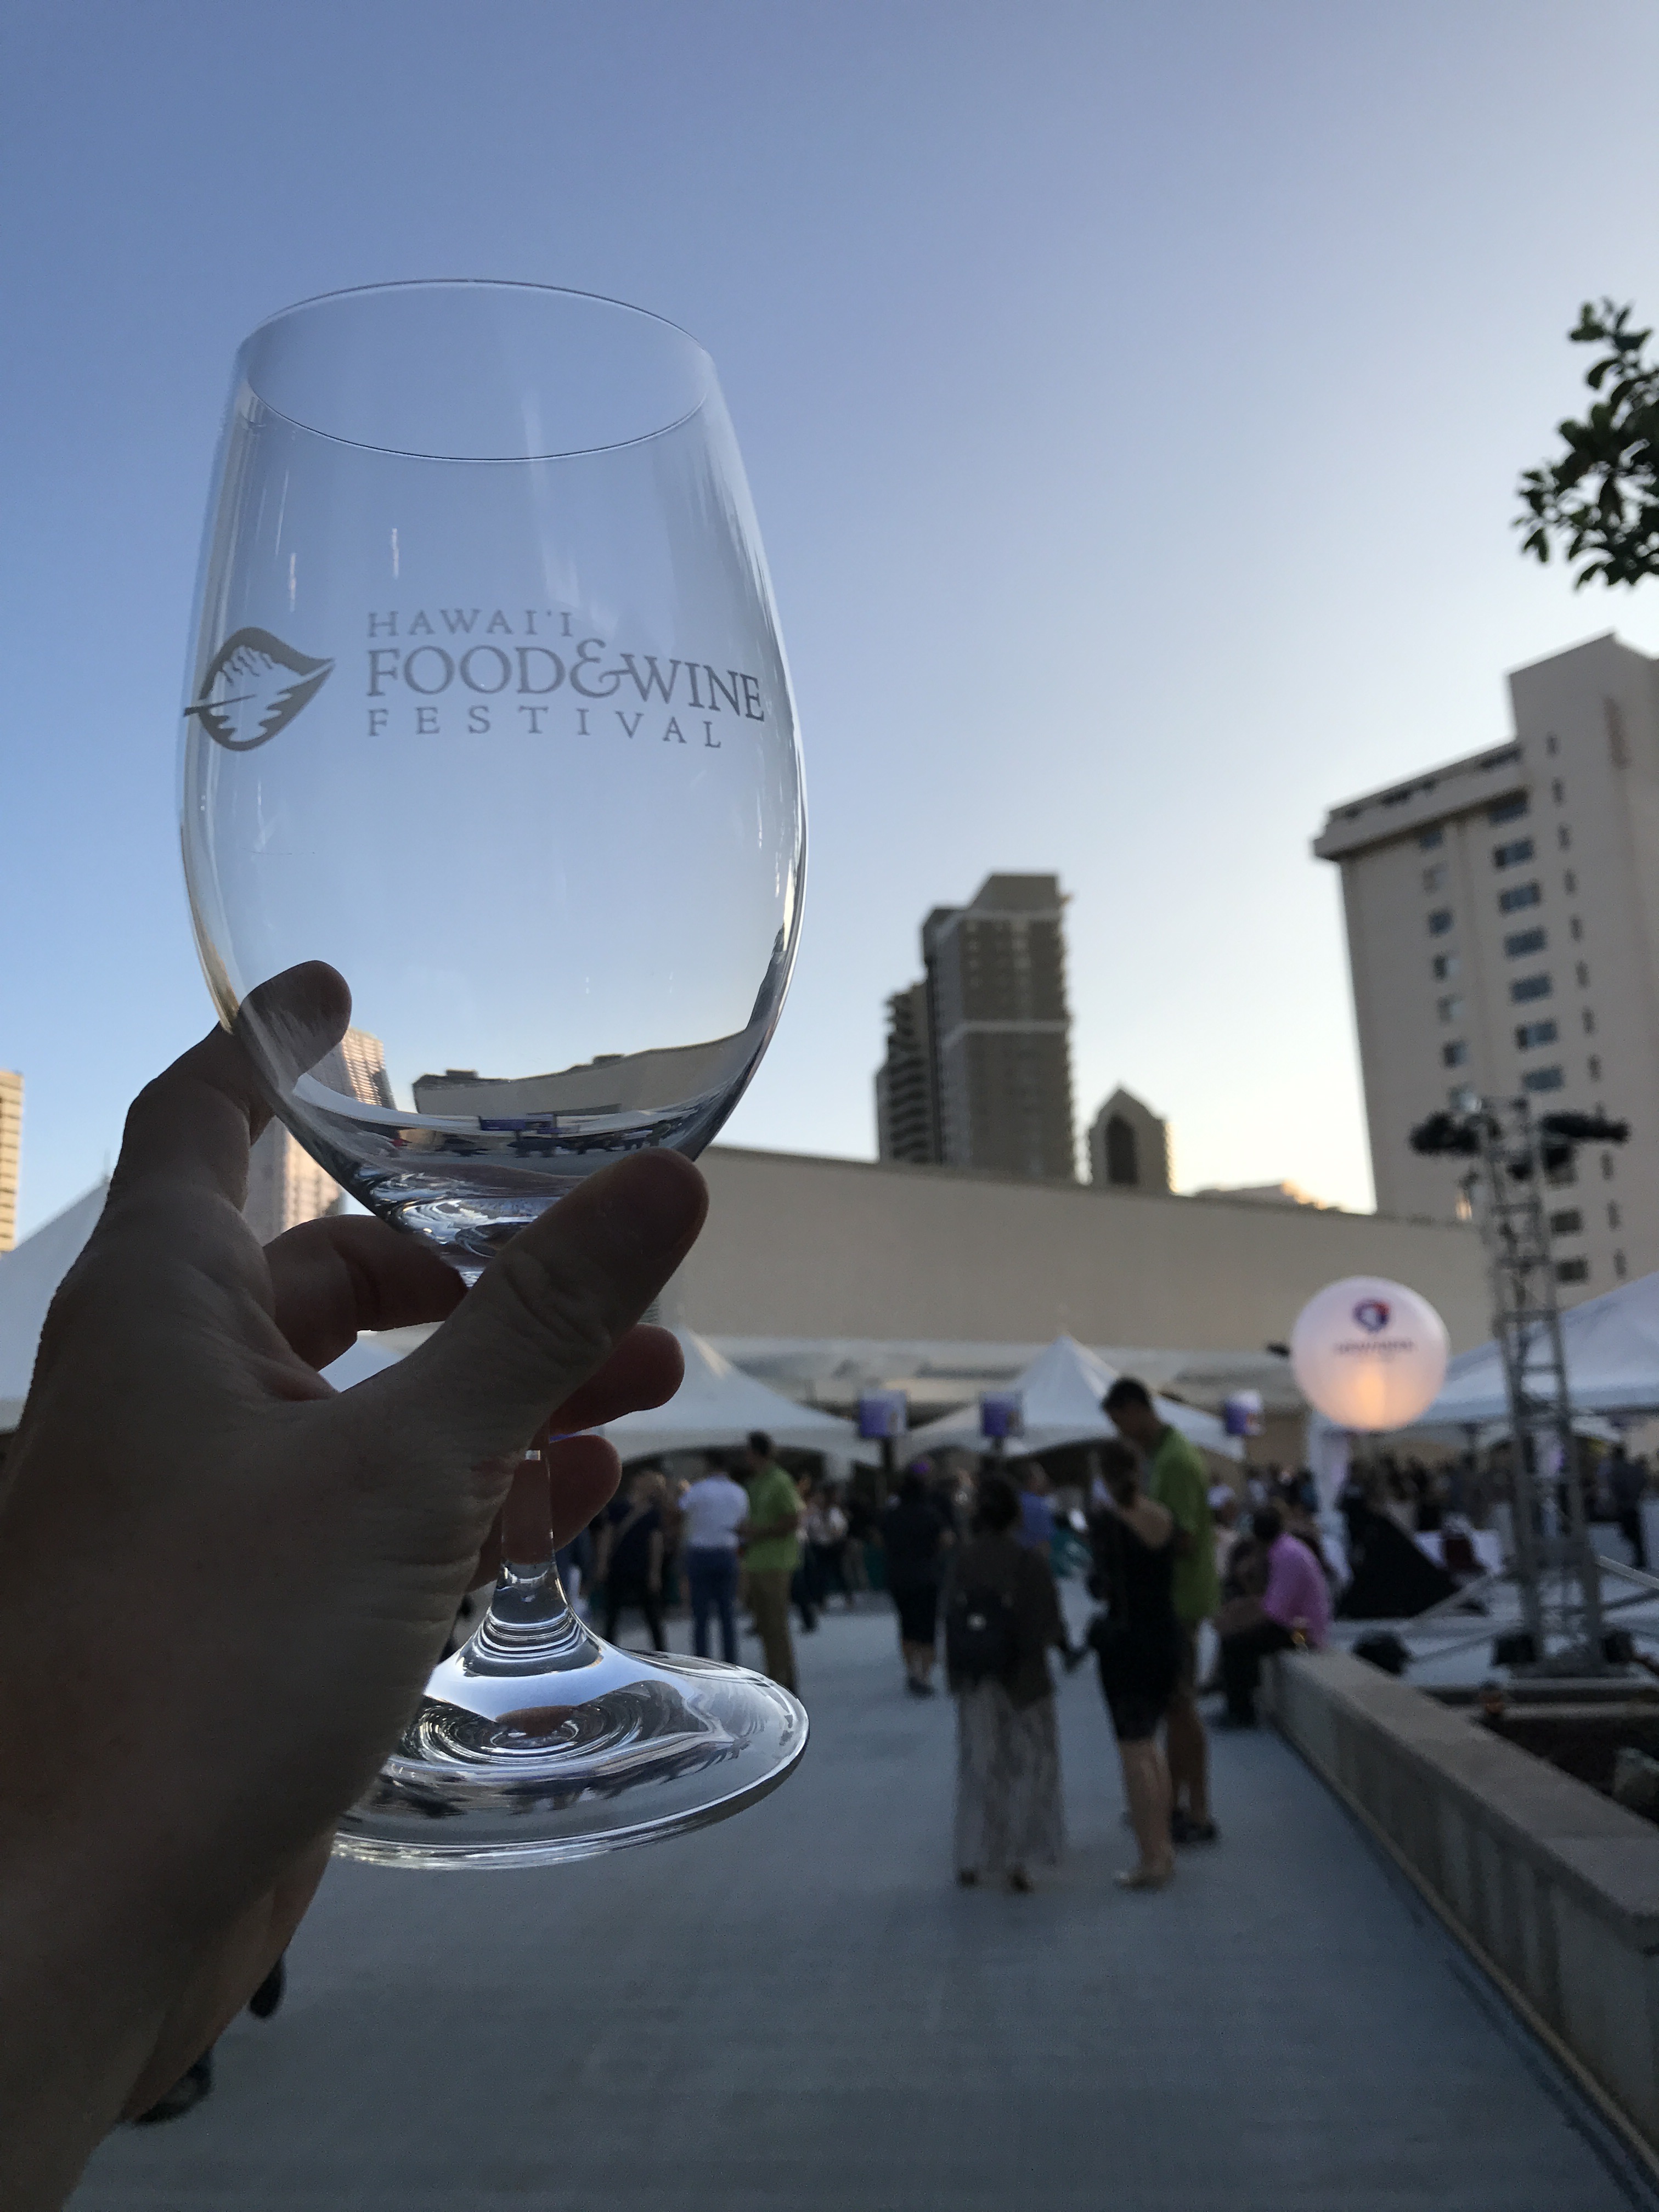 Hawaii Food and Wine Festival 2017 - Uncorked Event - Hawaii Convention Center - Communikait by Kait Hanson